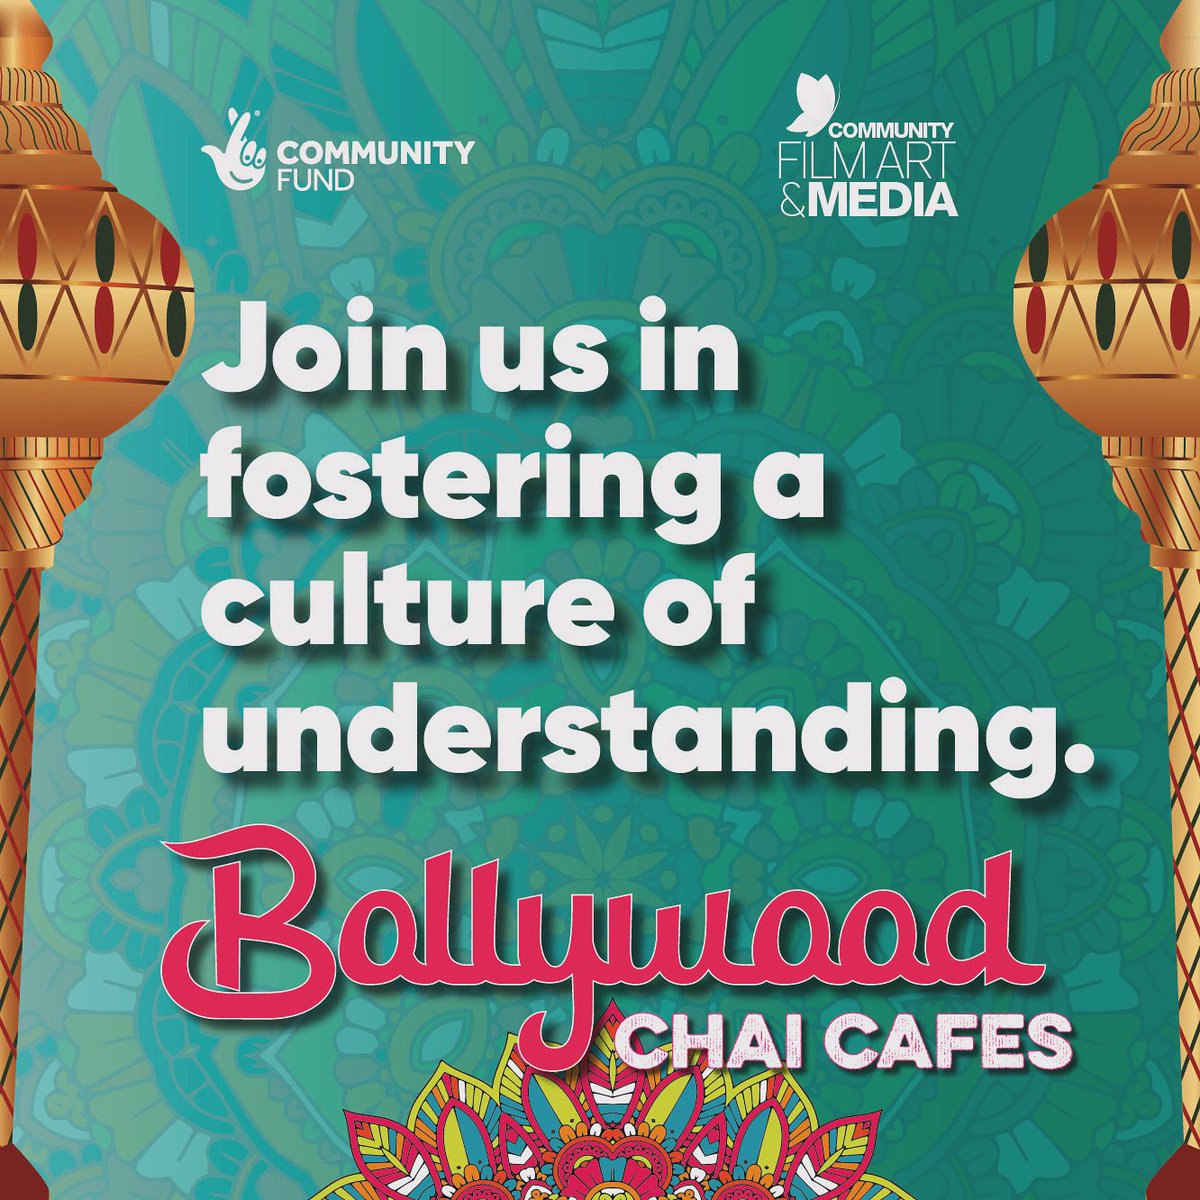 🌈 At Bollywood Chai Cafes, every cup tells a story. Join us in Bolton for chai, conversations, and a safe space to discuss mental well-being. Together, we're breaking barriers and building a culture of empathy. 💚💬 #ChaiAndTalks #MentalHealthSupport #BoltonCommunity